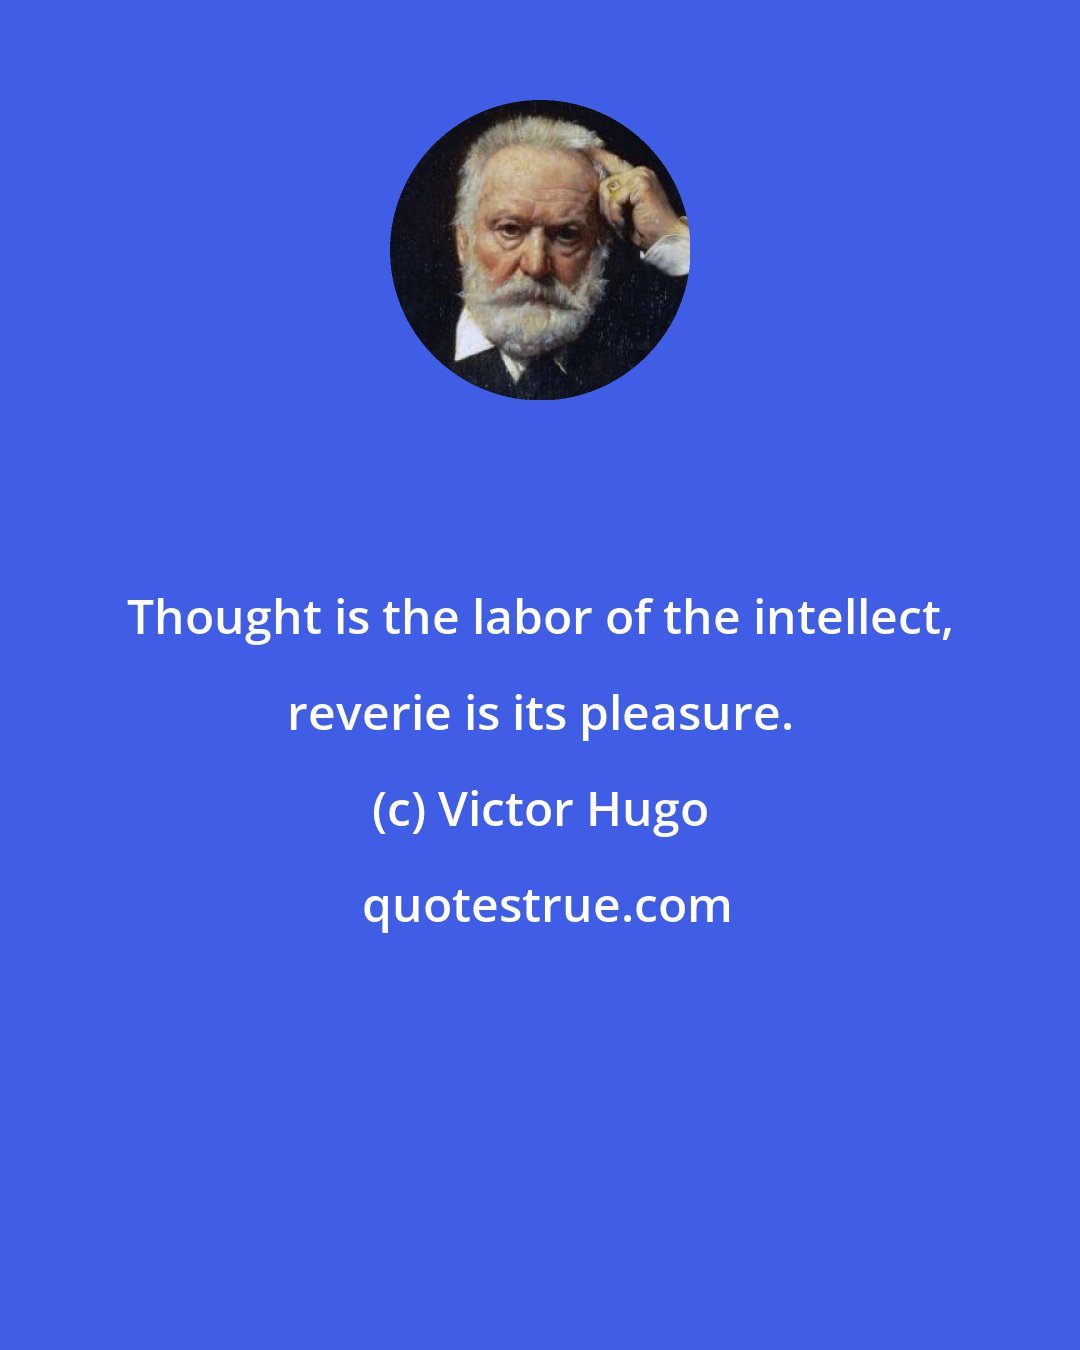 Victor Hugo: Thought is the labor of the intellect, reverie is its pleasure.